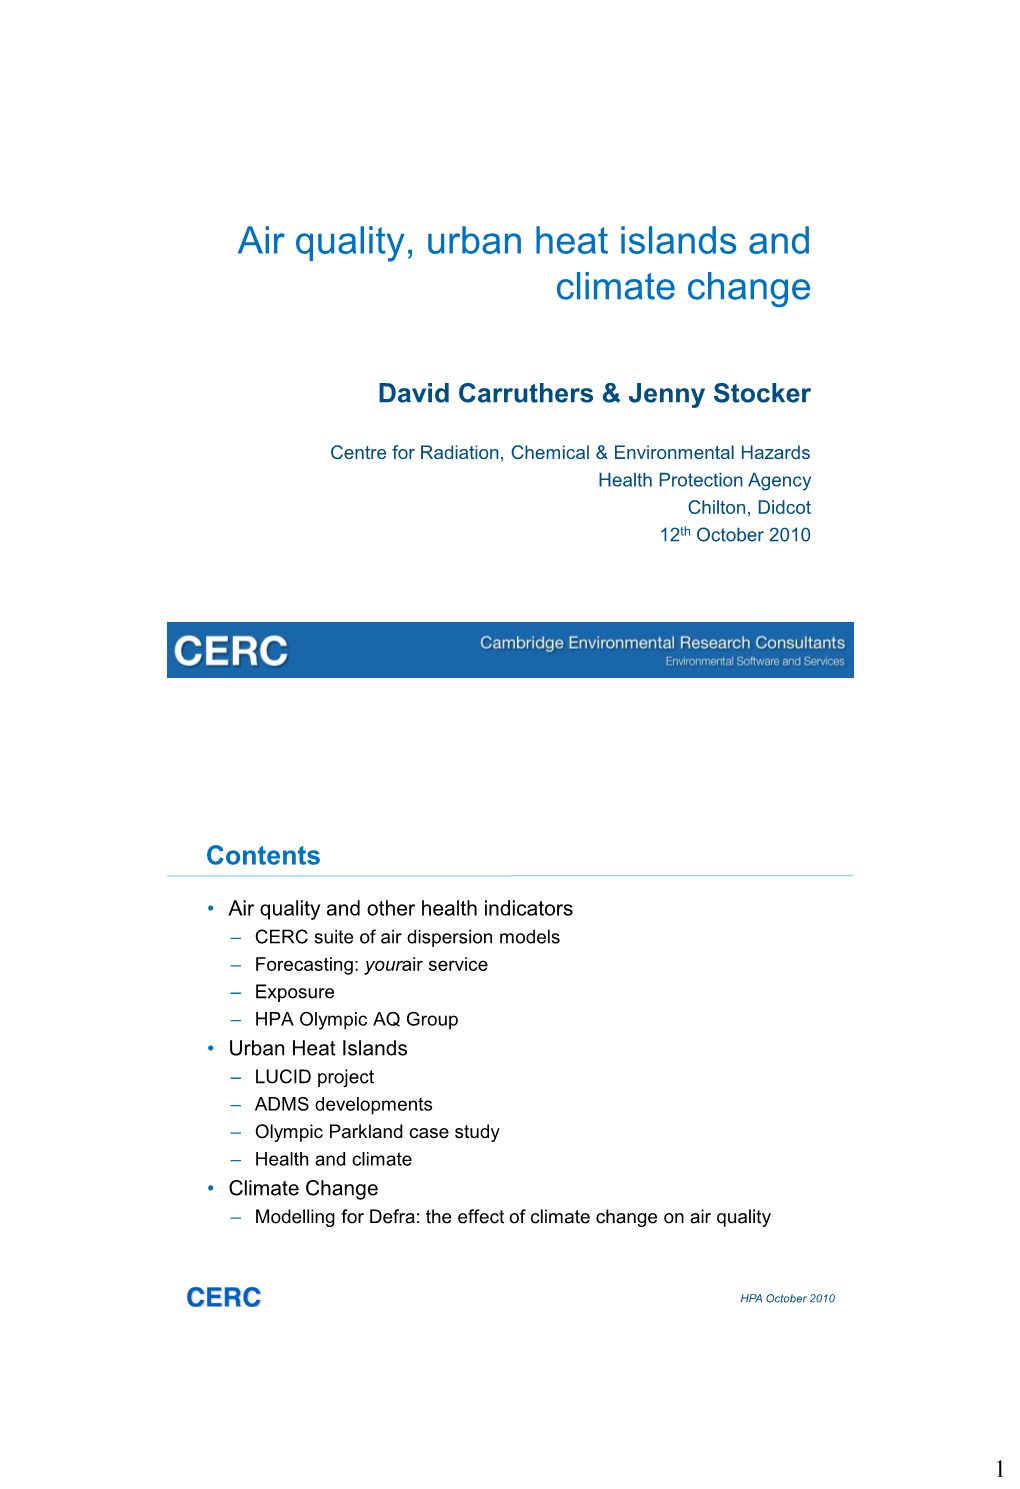 Air Quality, Urban Heat Islands and Climate Change